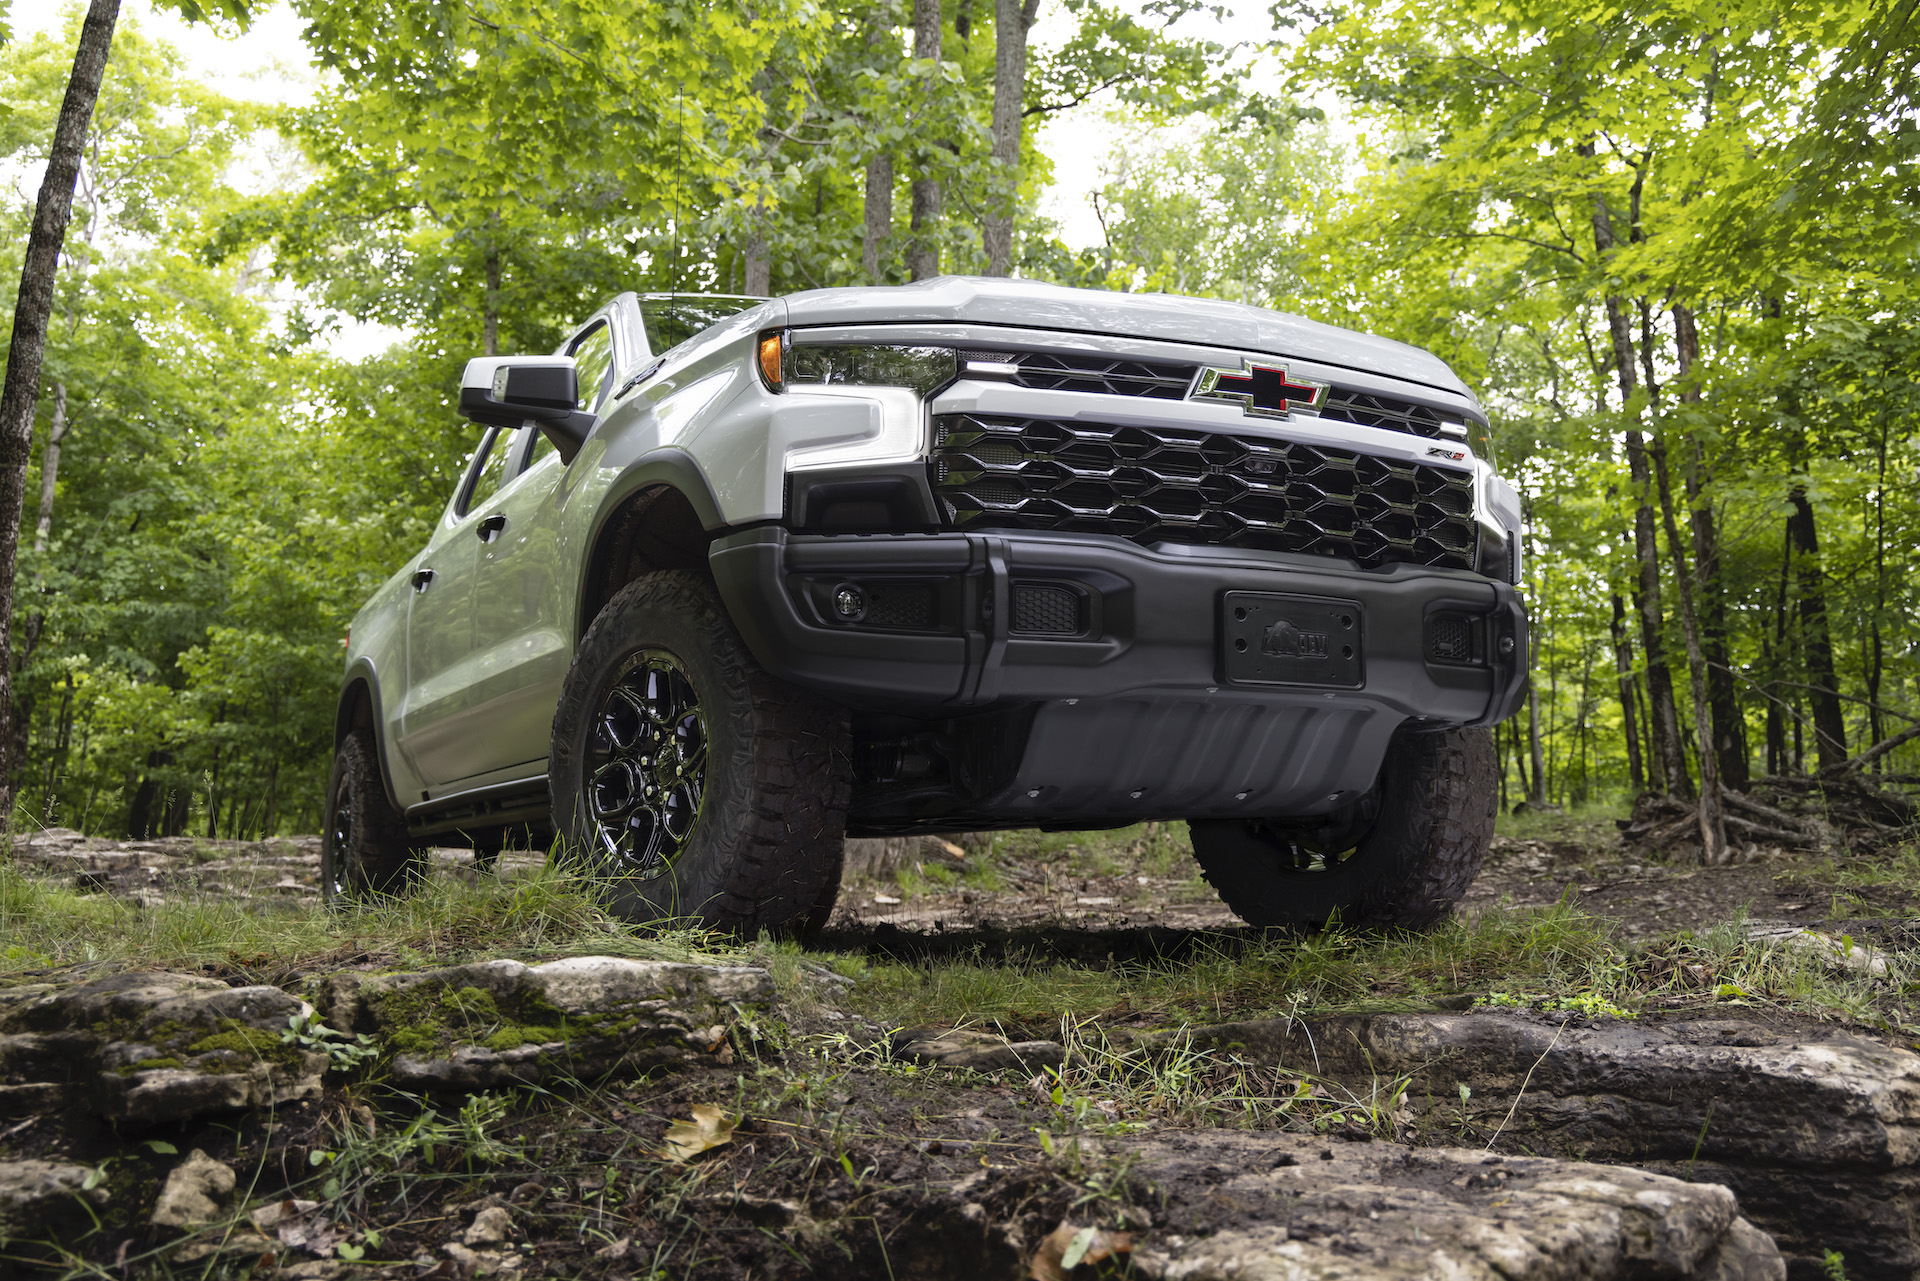 2023 Chevrolet Silverado 1500 Zr2 Bison Adds Even More Off Road Prowess